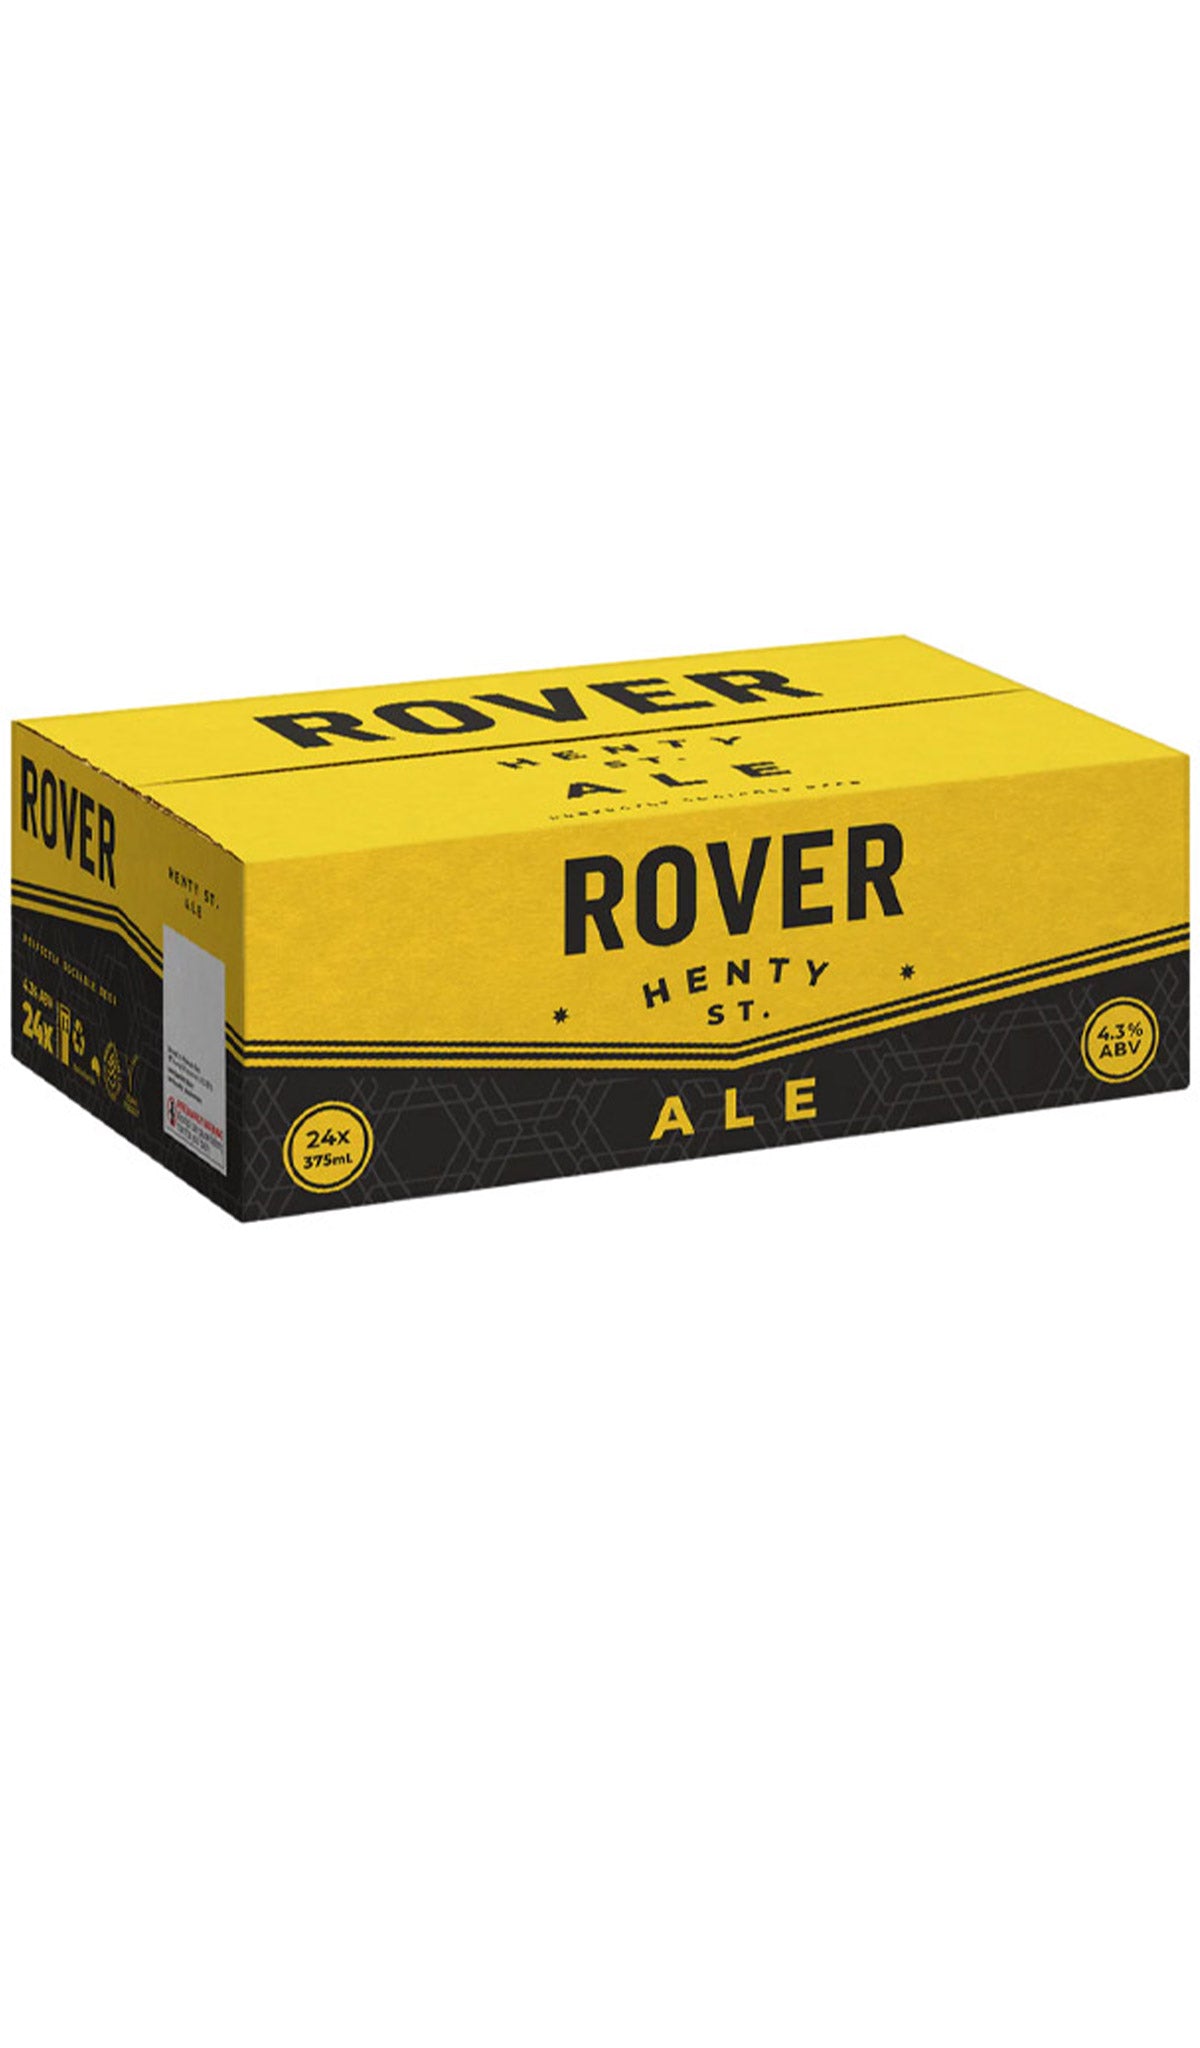 Find out more or buy Rover Henty St. Ale 375ml (24 Can Slab) online at Wine Sellers Direct - Australia’s independent liquor specialists.